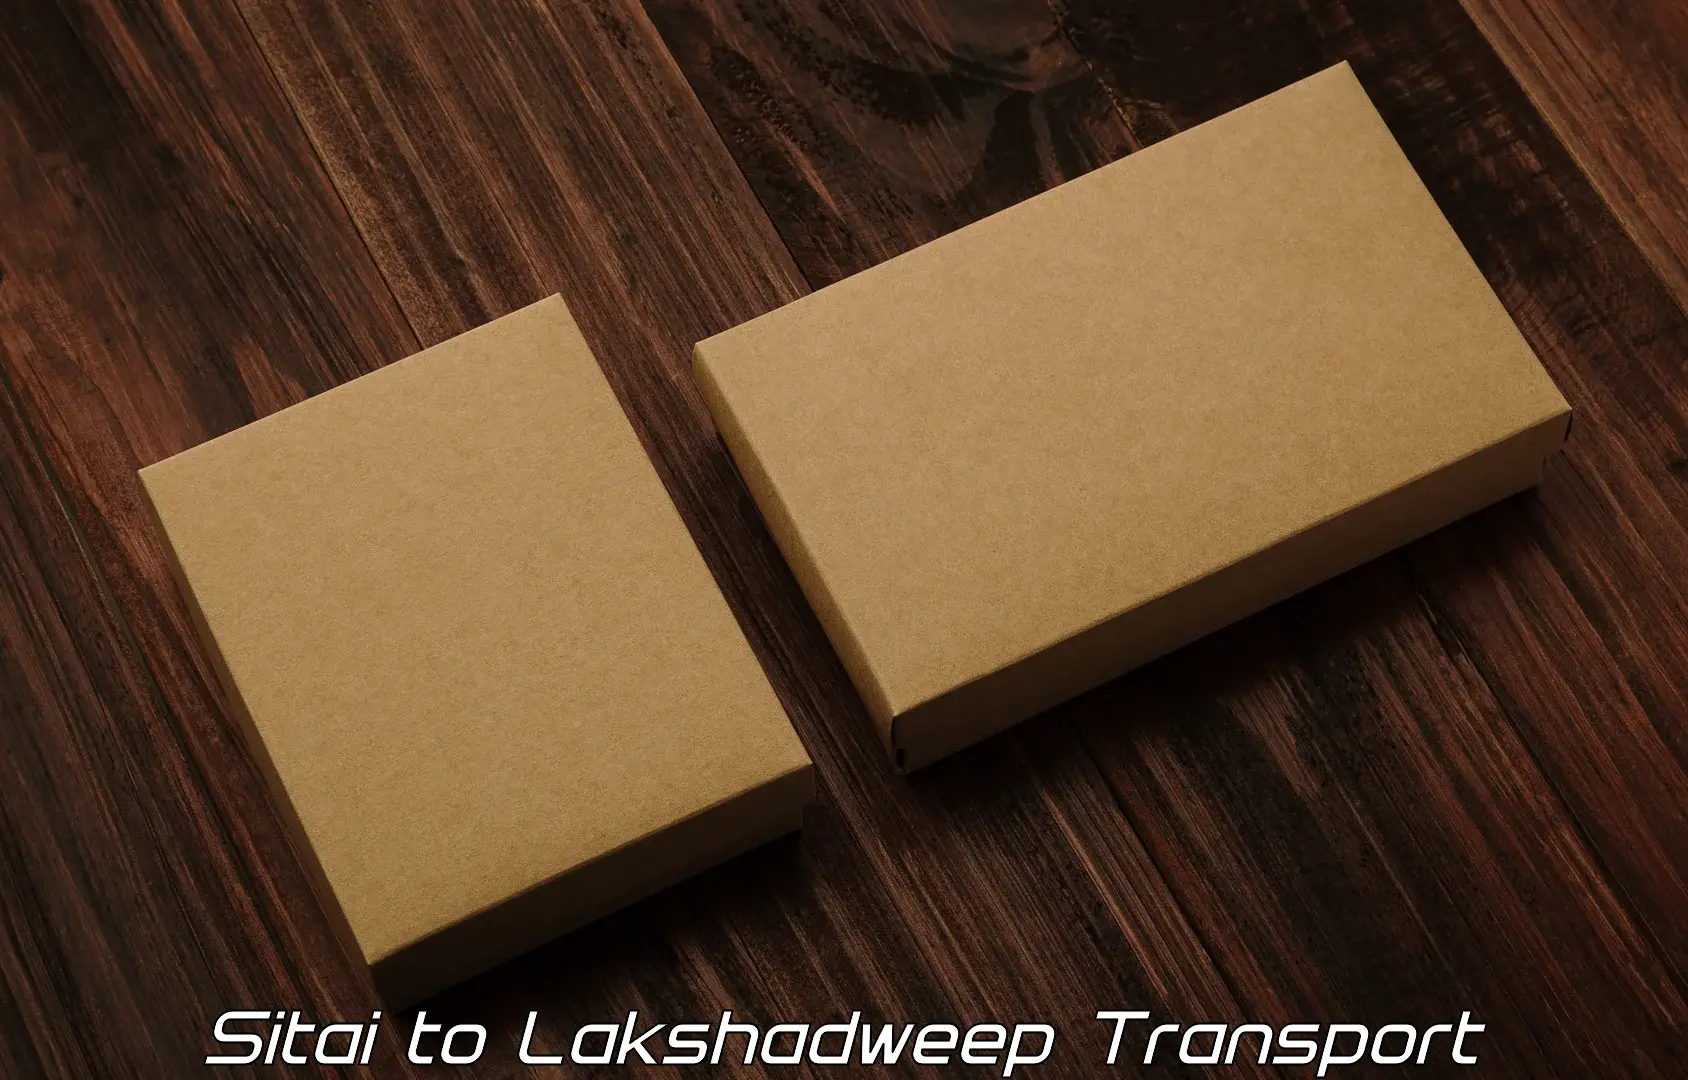 Air freight transport services Sitai to Lakshadweep